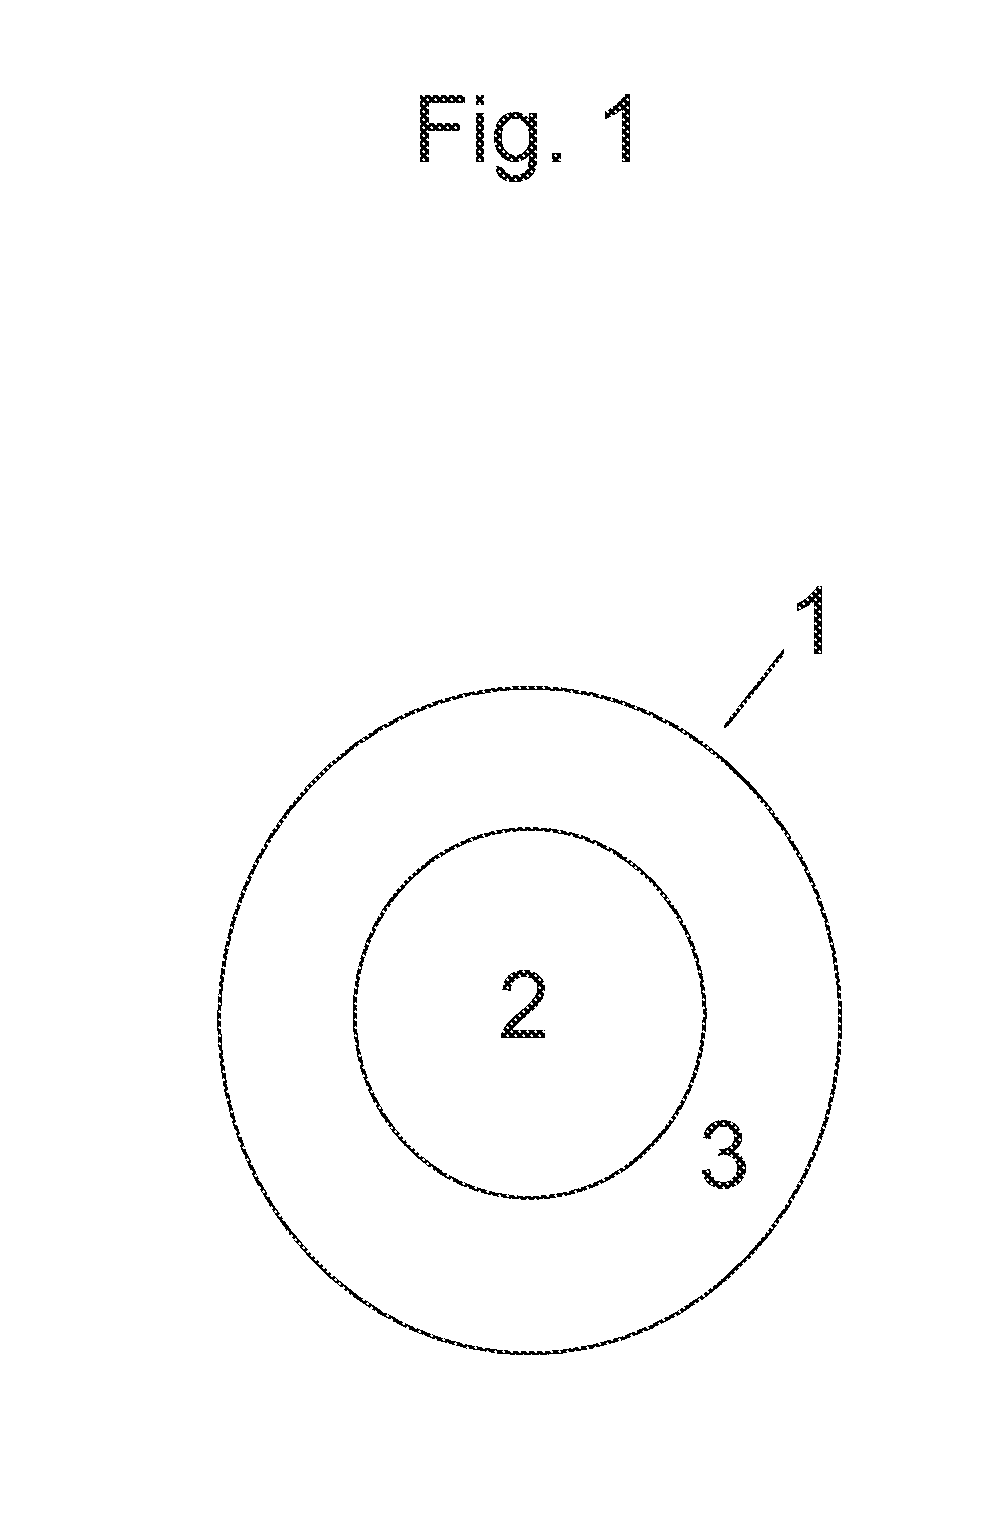 Structured acrylate copolymer for use in multi-phase systems